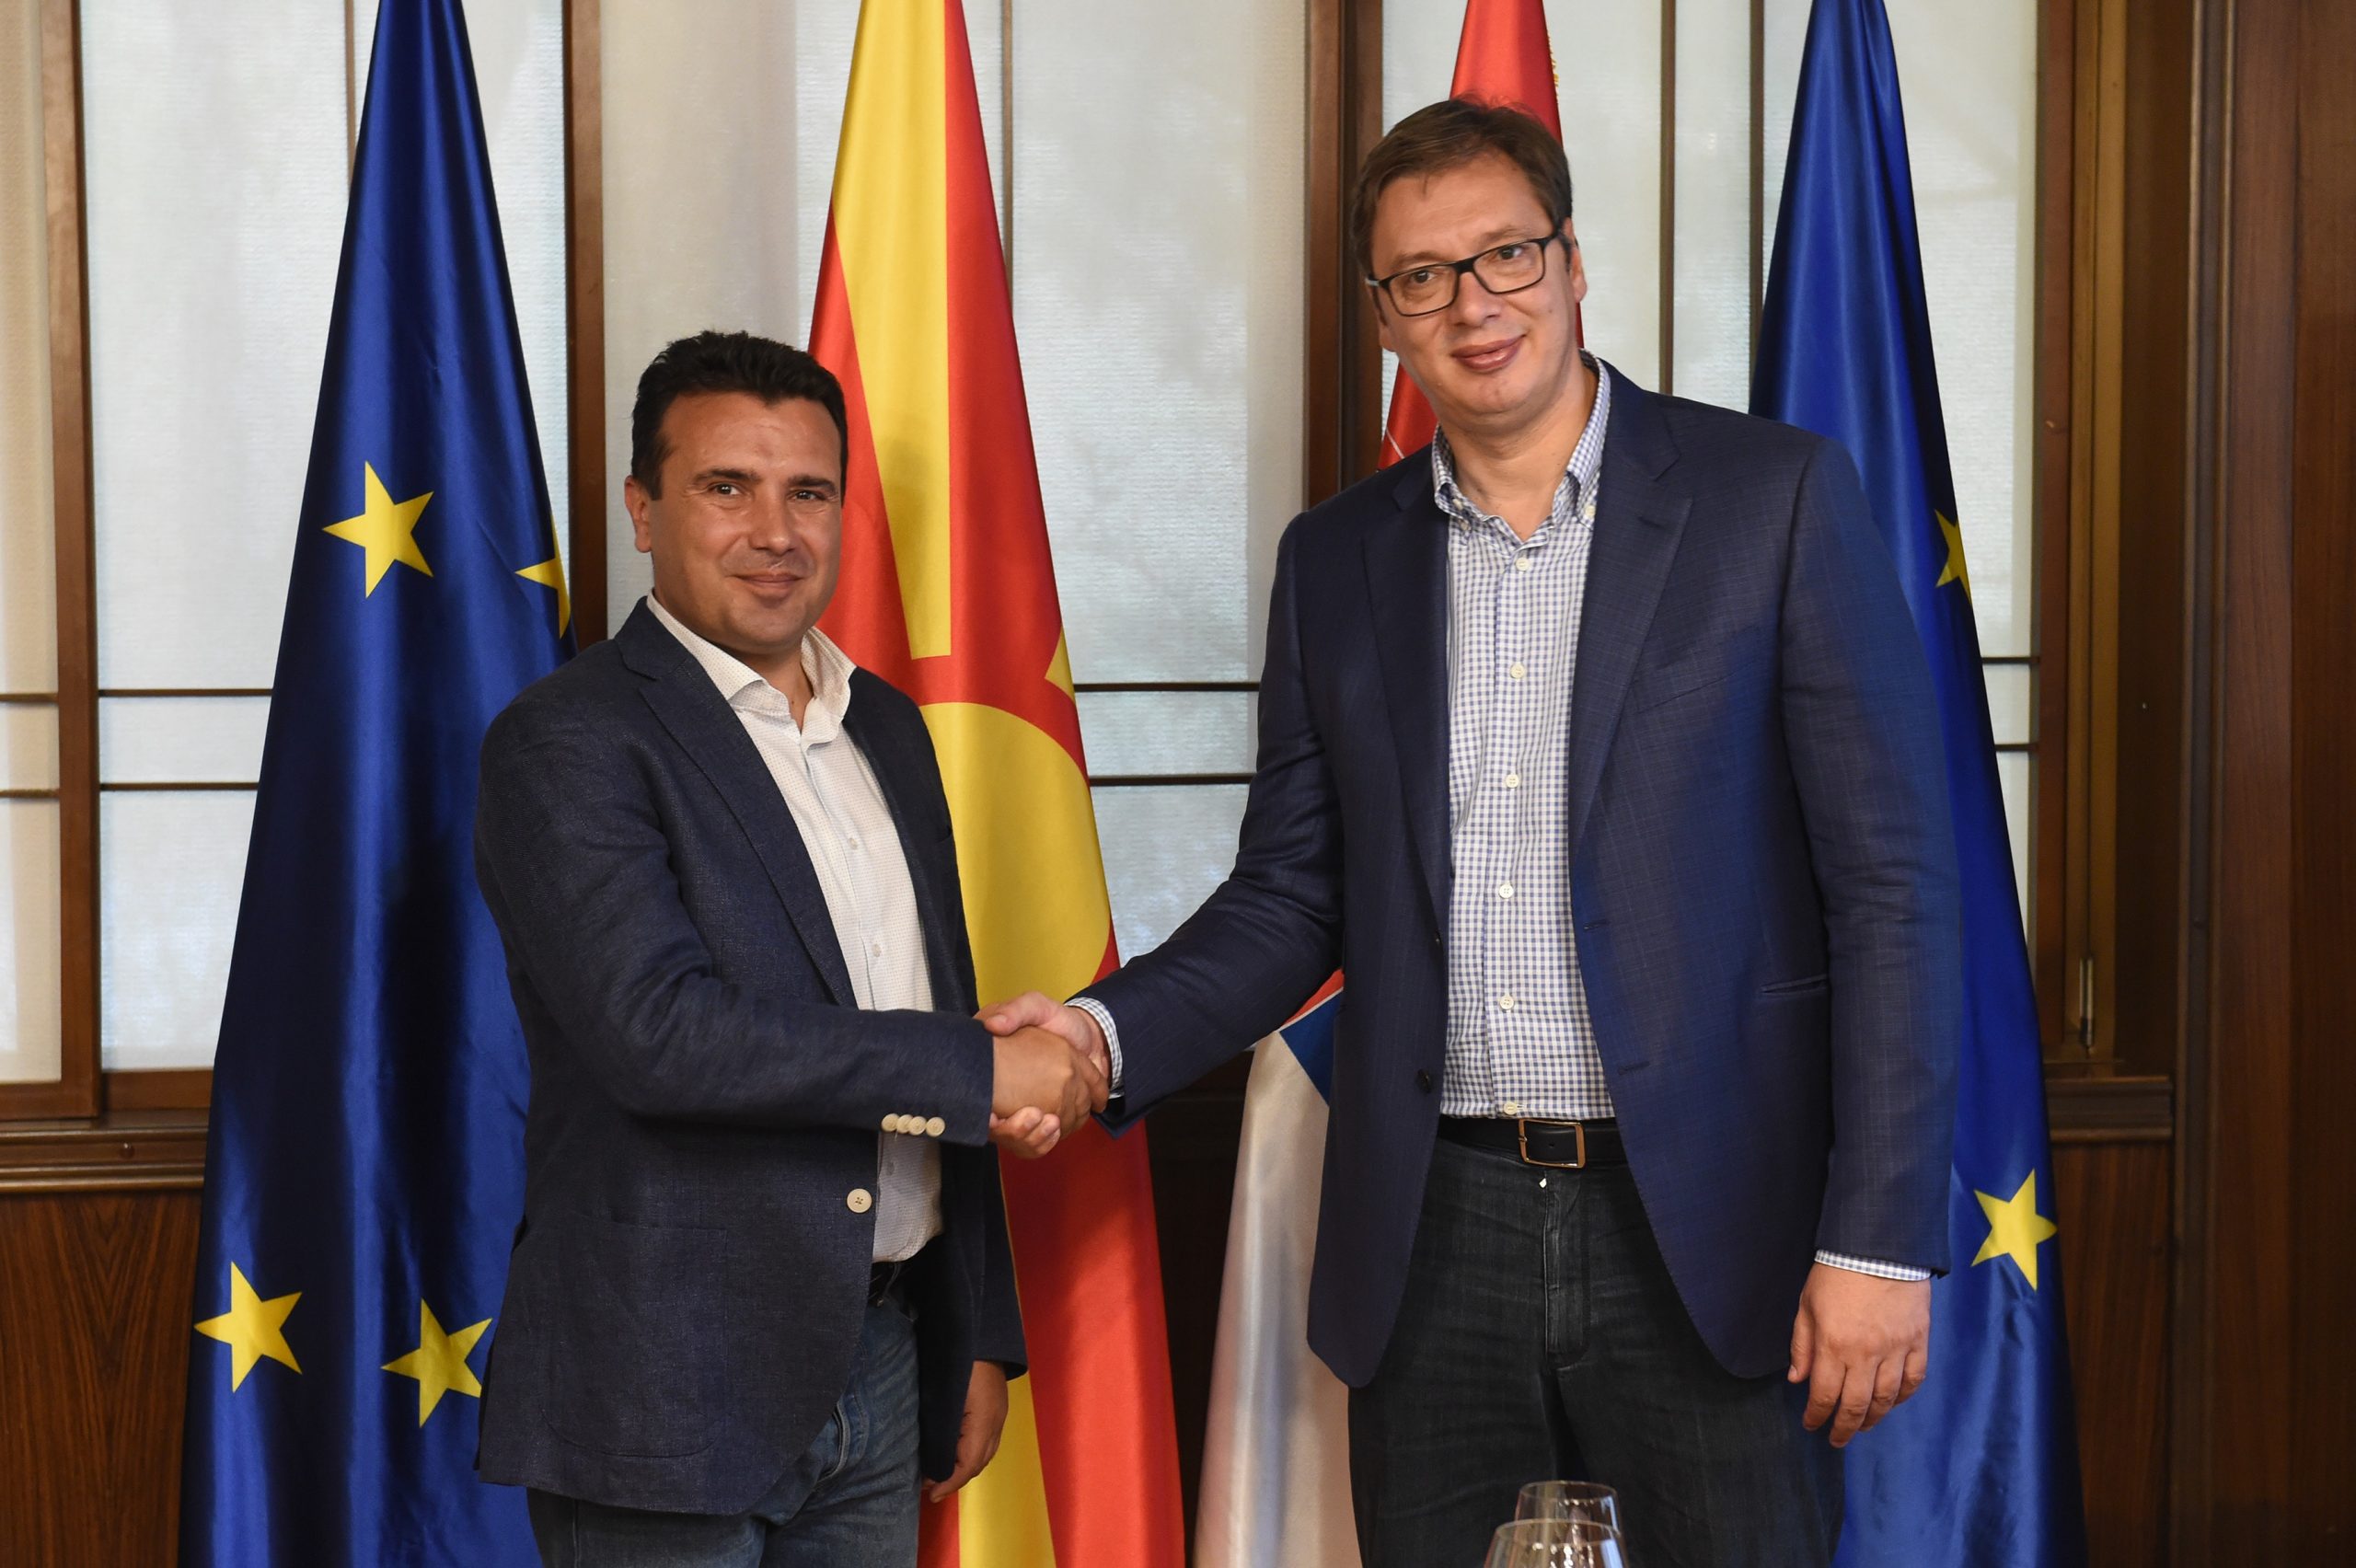 N. Macedonia to Purchase 8,000 Vaccine Doses from Serbia, Says Zaev